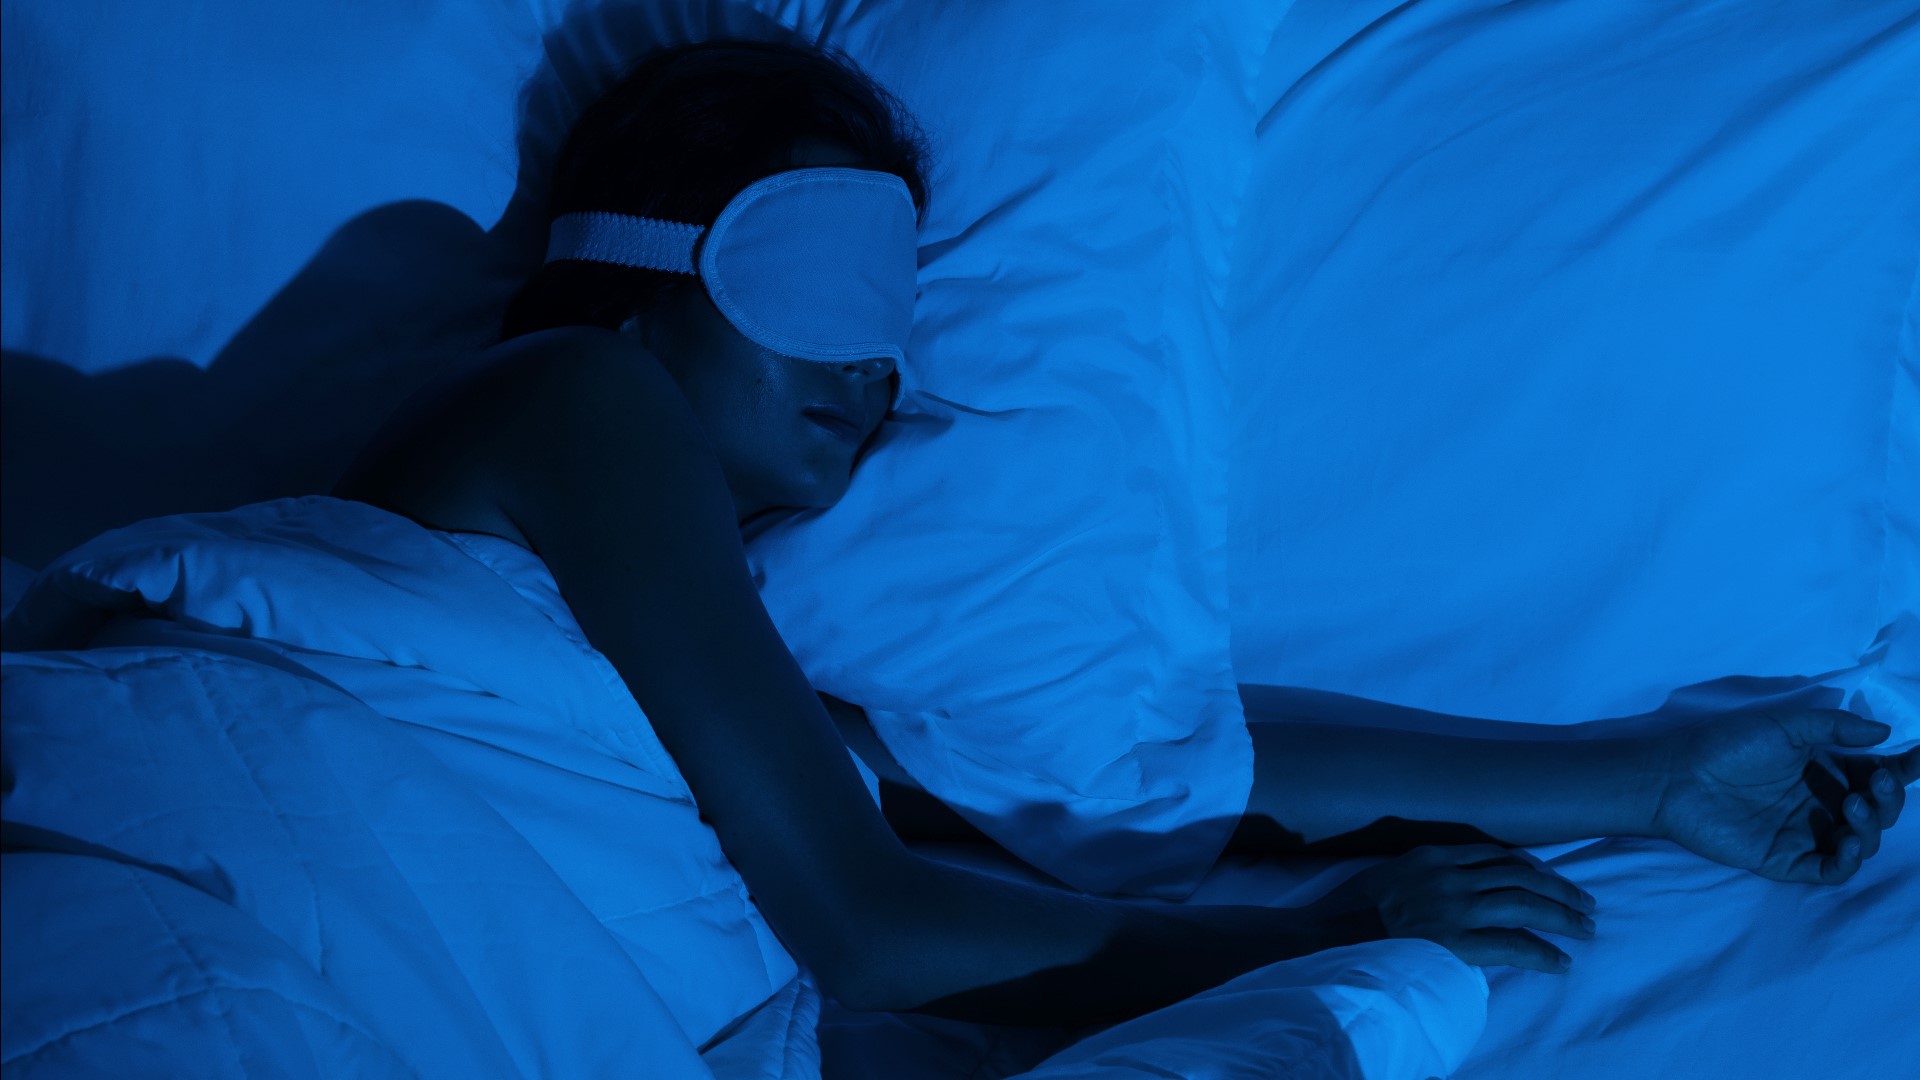 UofL Health Dr. Shannon Lynn explains what good sleep hygiene is and gives some suggestions for a good night's sleep.